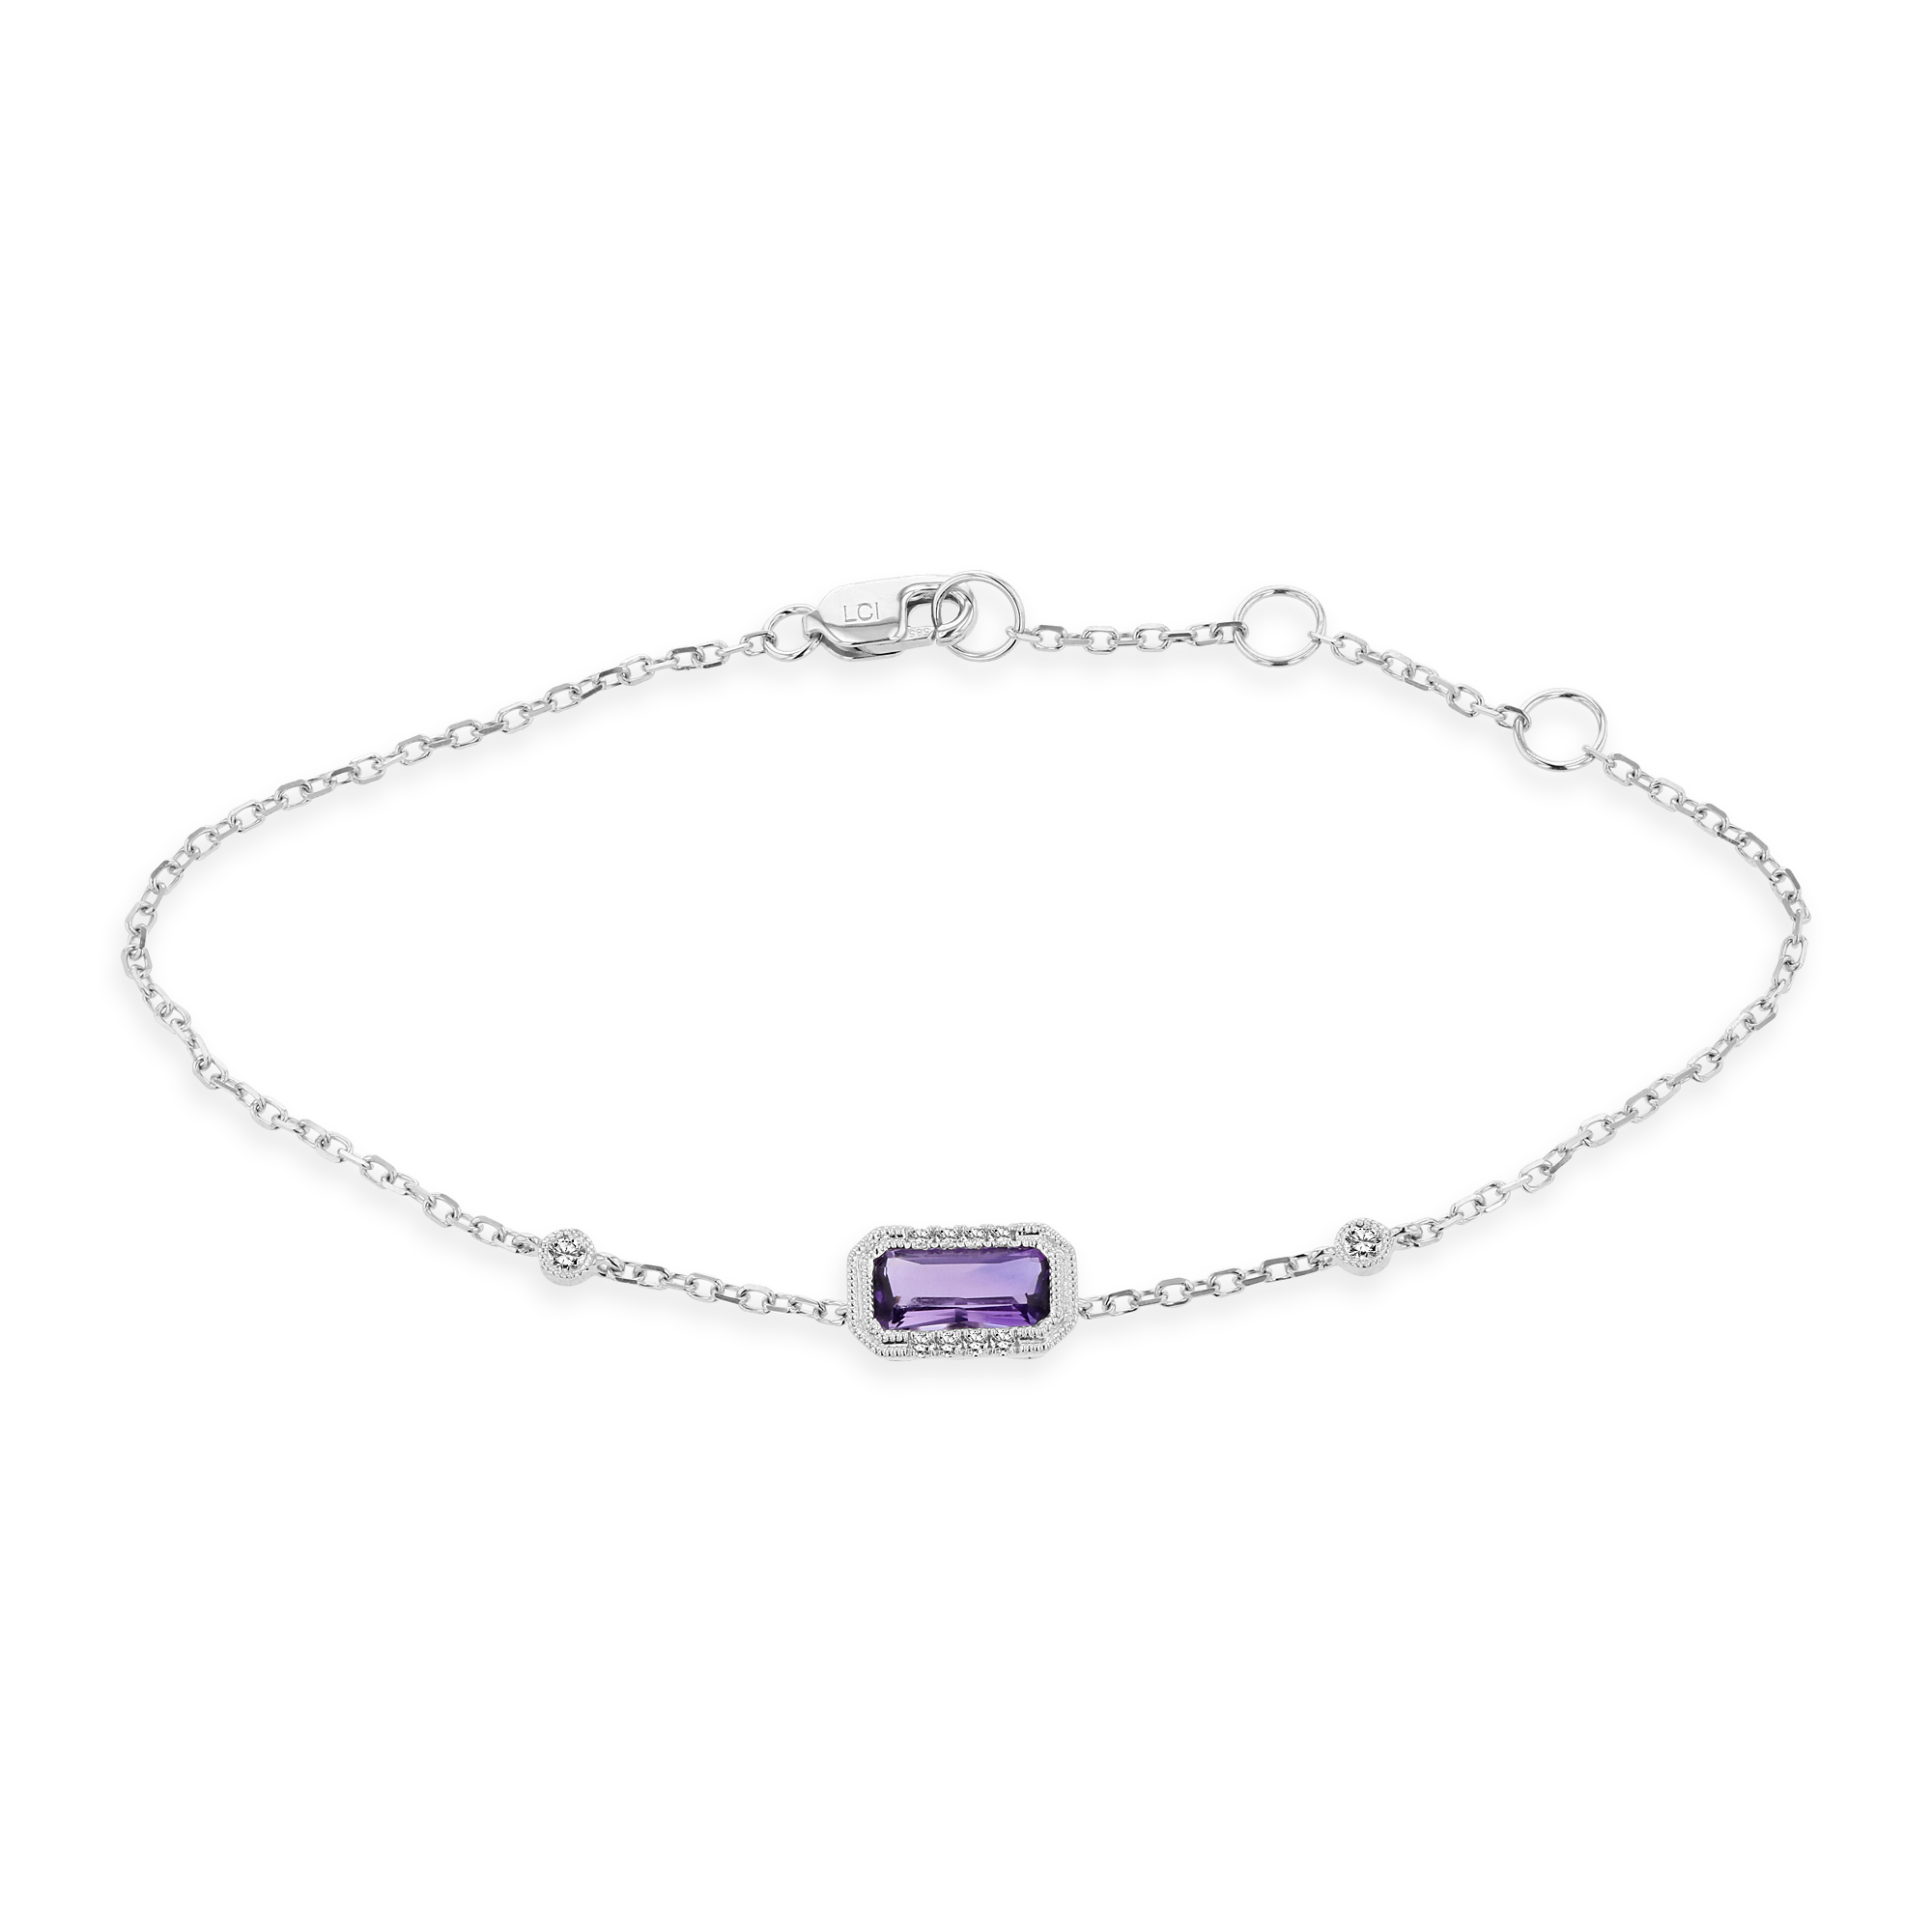 View 0.13ctw Diamond and Amethyst Fashion Bracelet in 14k White Gold